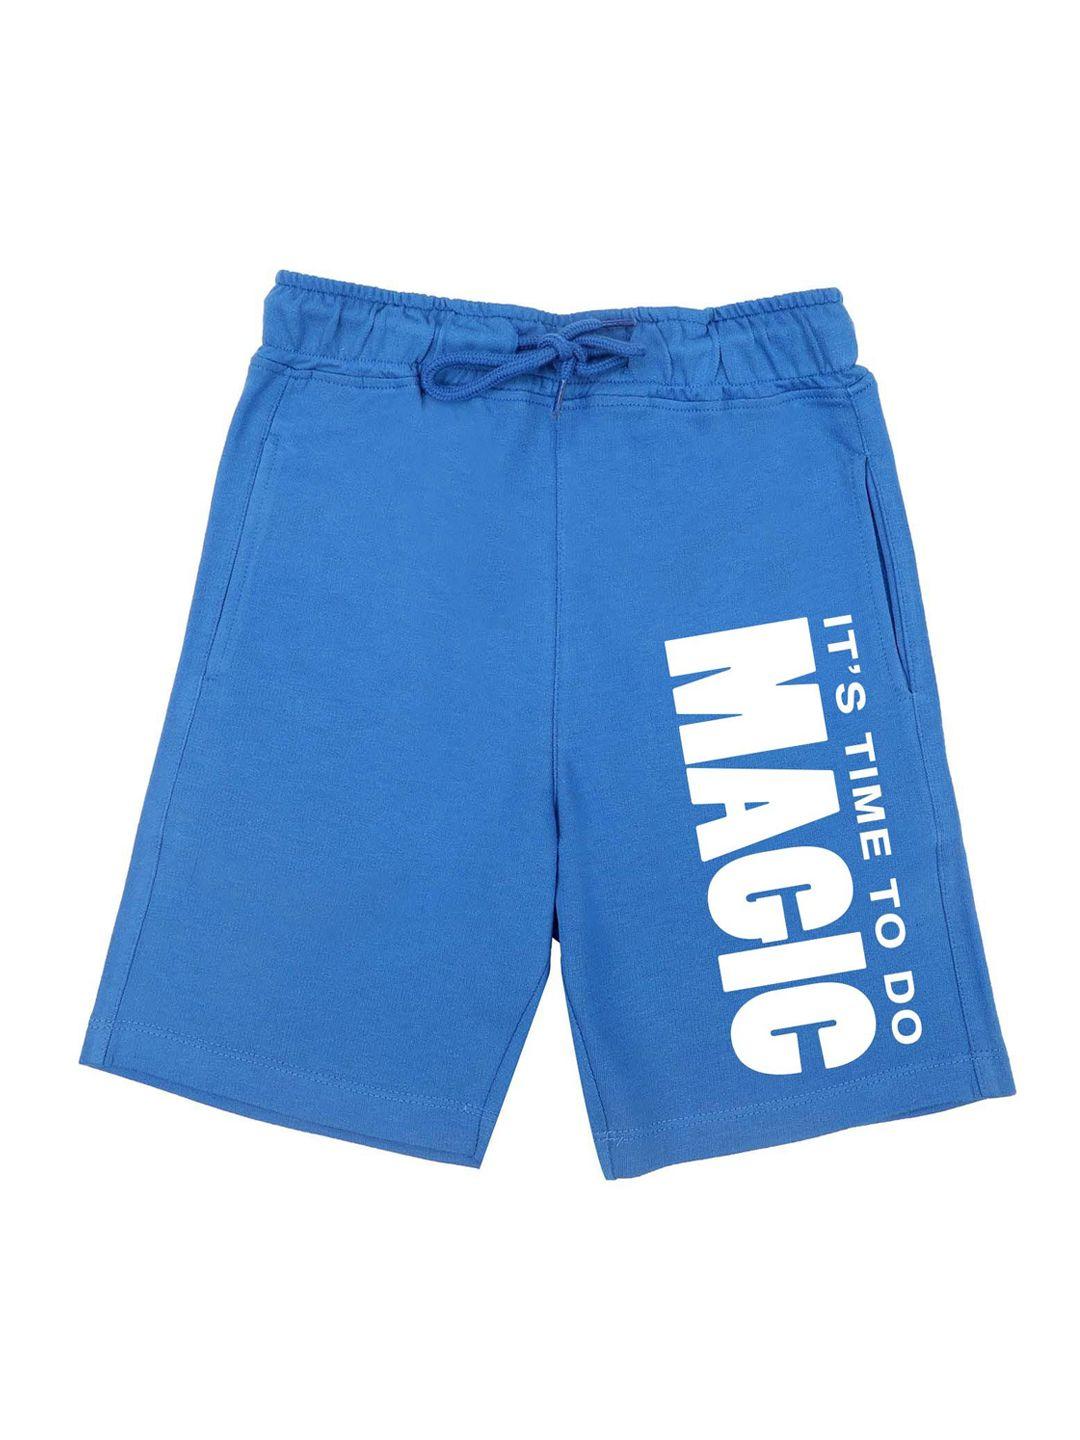 harry potter by wear your mind boys blue printed harry potter shorts